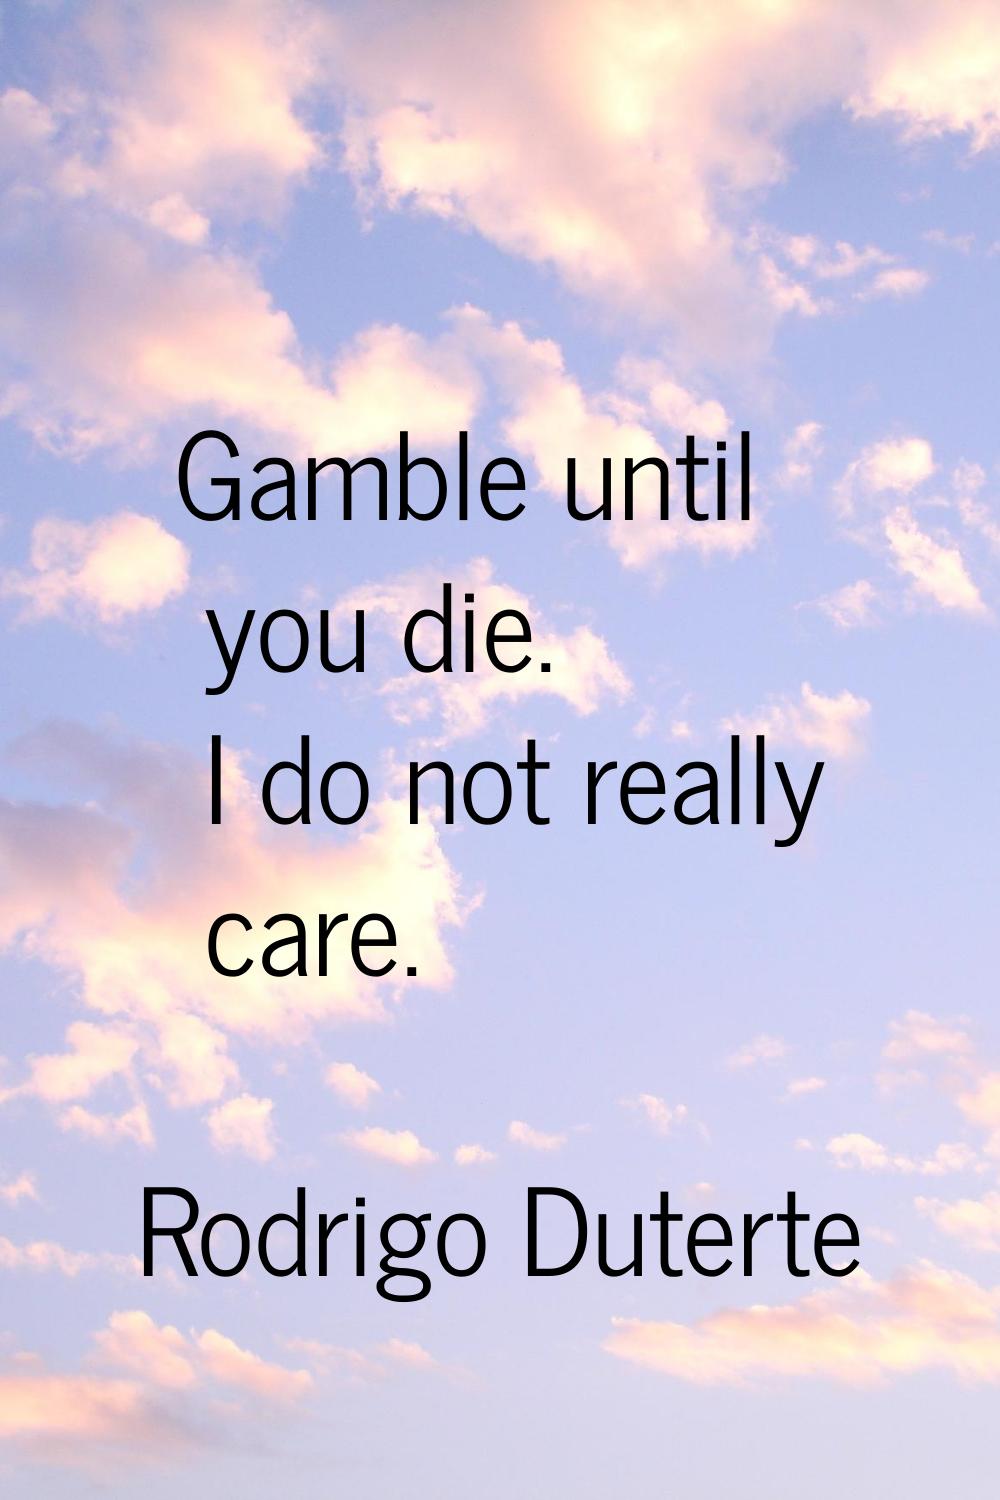 Gamble until you die. I do not really care.